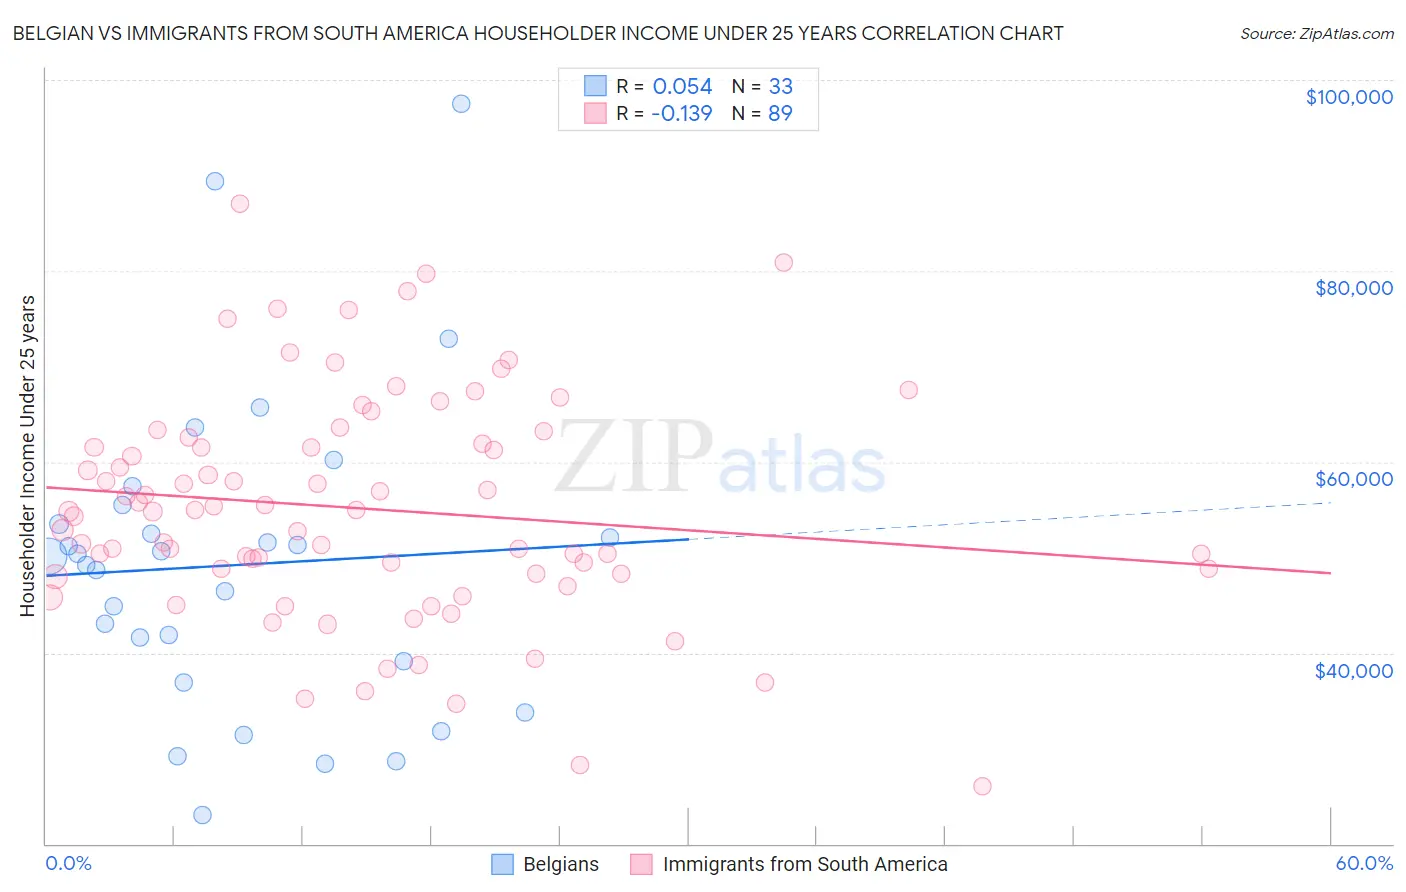 Belgian vs Immigrants from South America Householder Income Under 25 years